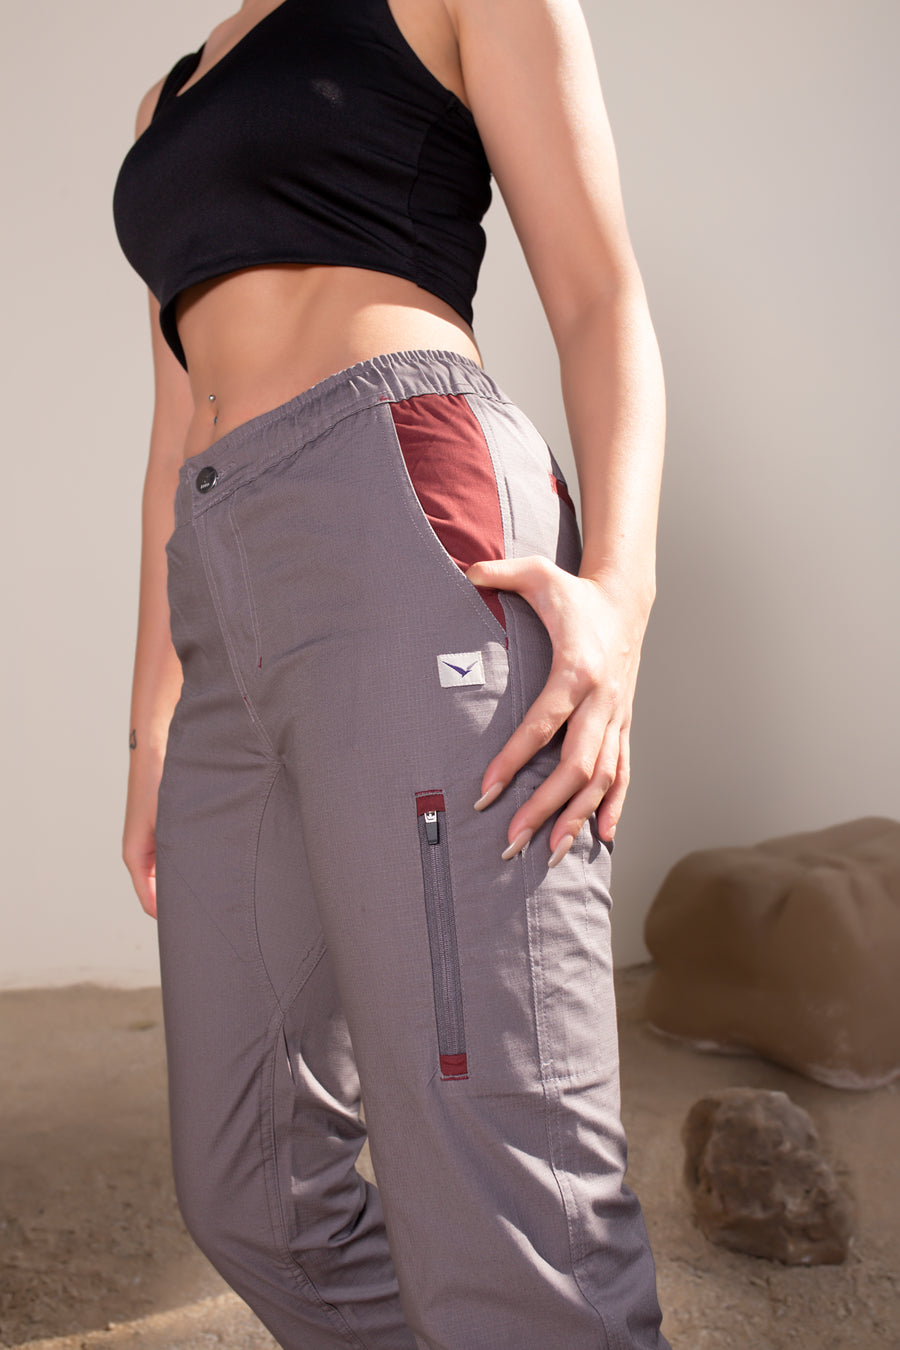 Women's Yosemite Rip Stop in Gray | VOLO Apparel | Made with a durable stretch rip stop, the Yosemite Rip Stop pant is our ultimate six pocket lifestyle pant. Featuring a 3 point gusset, snap button security pockets, 2 zipper pockets and the comfort of cotton ripstop, these are your go to adventure pants. Designed to take you from the summit, to the city.